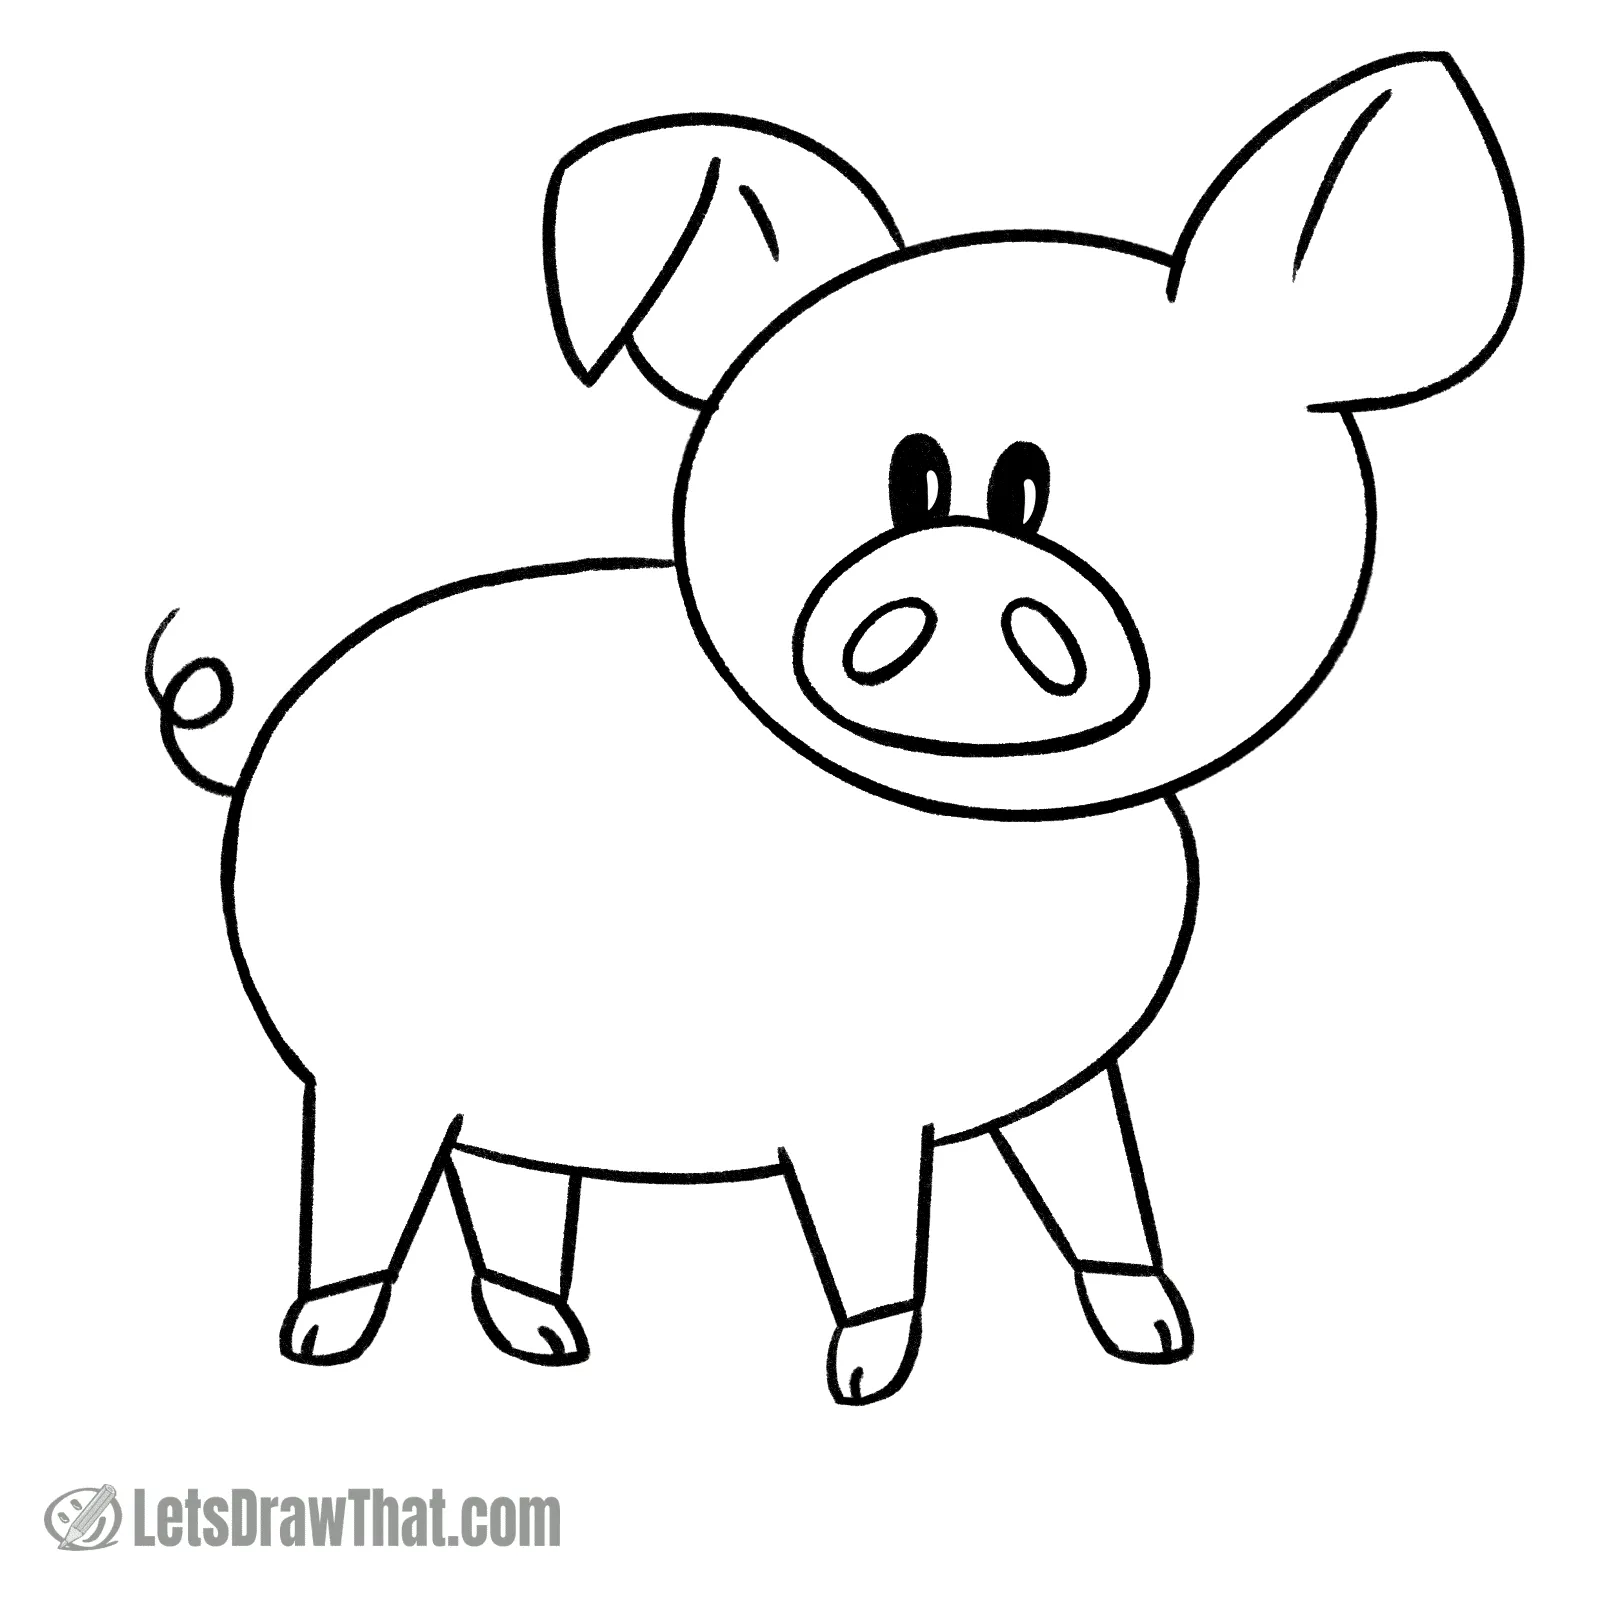 How to draw a pig: finished outline drawing